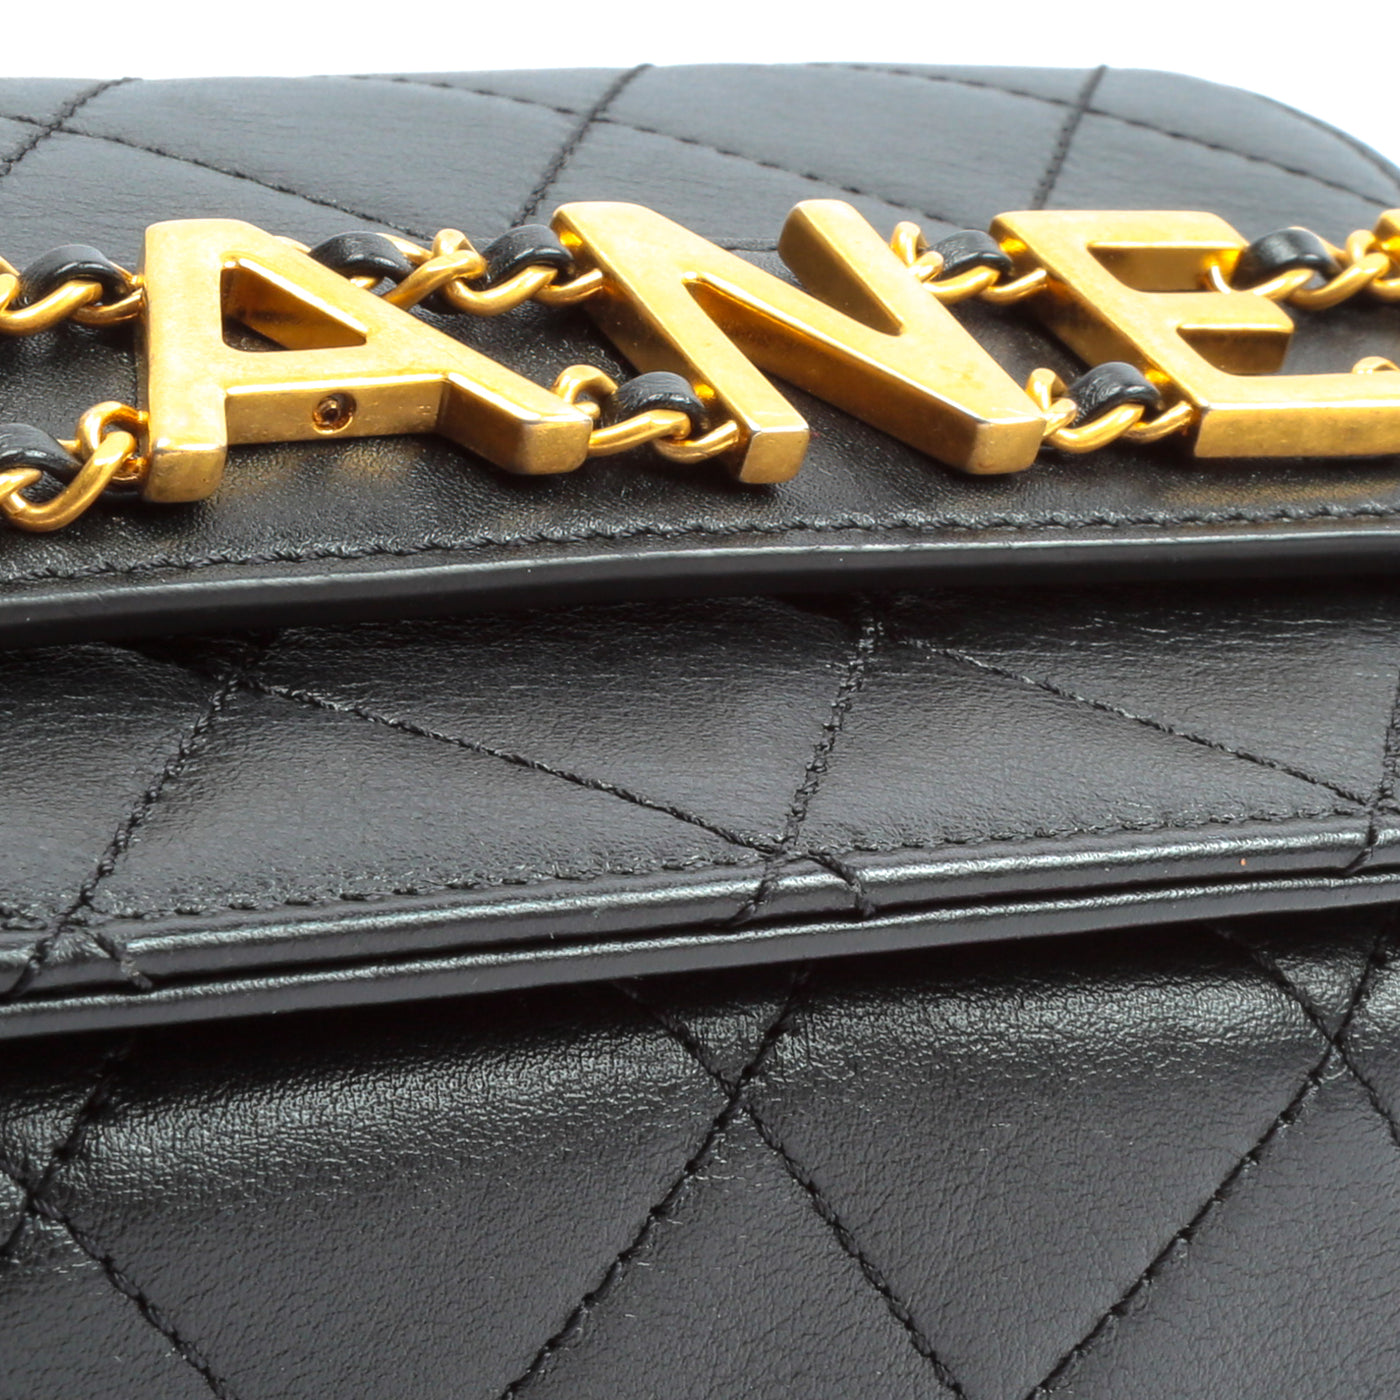 CHANEL Enchained Flap Bag -Small